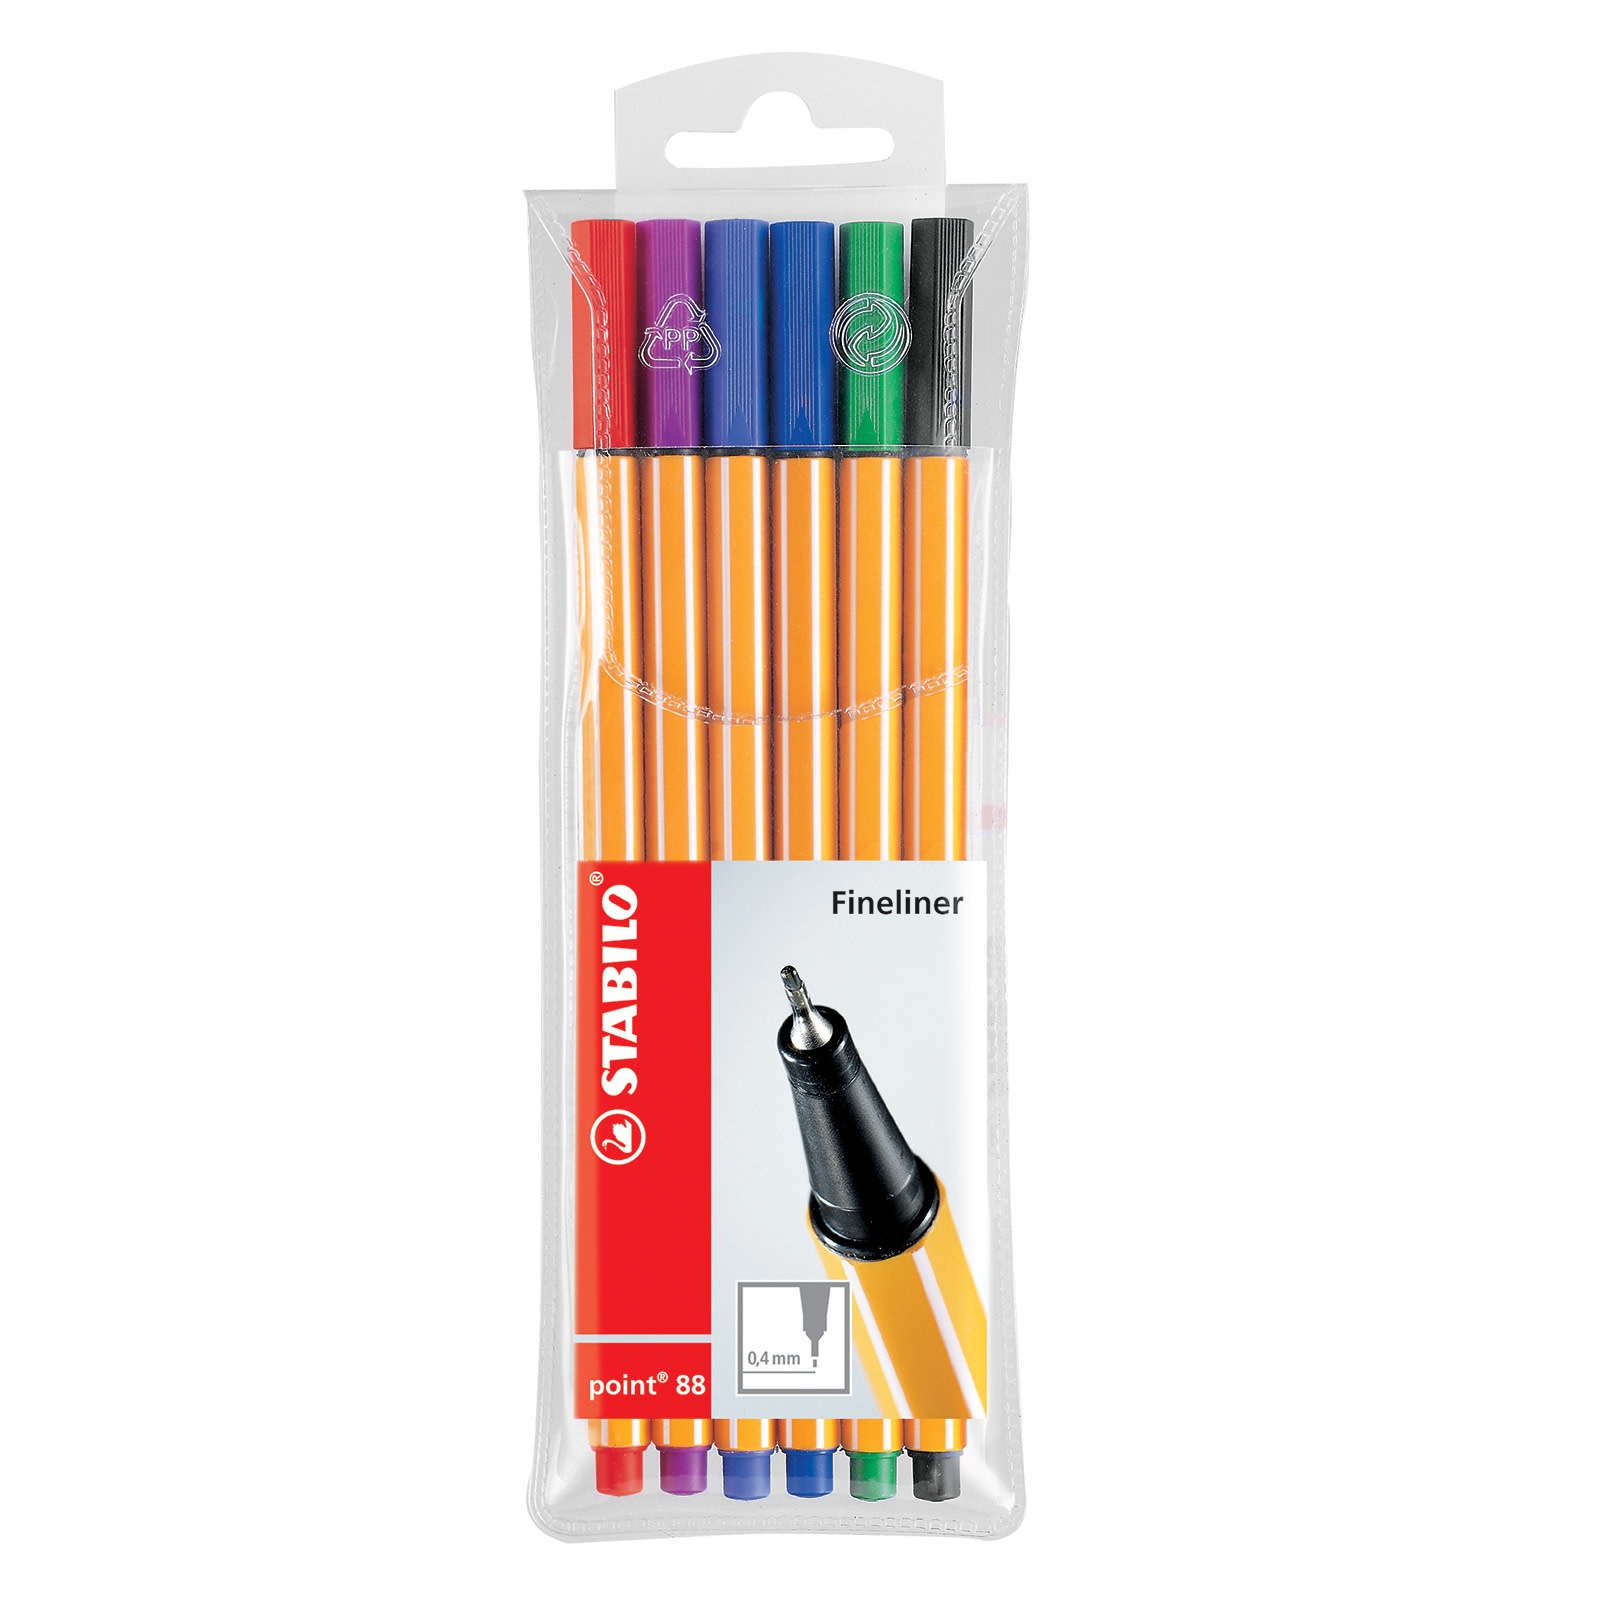 Fineliner - Stabilo Point 88 - Wallet of 25 - Assorted Colors